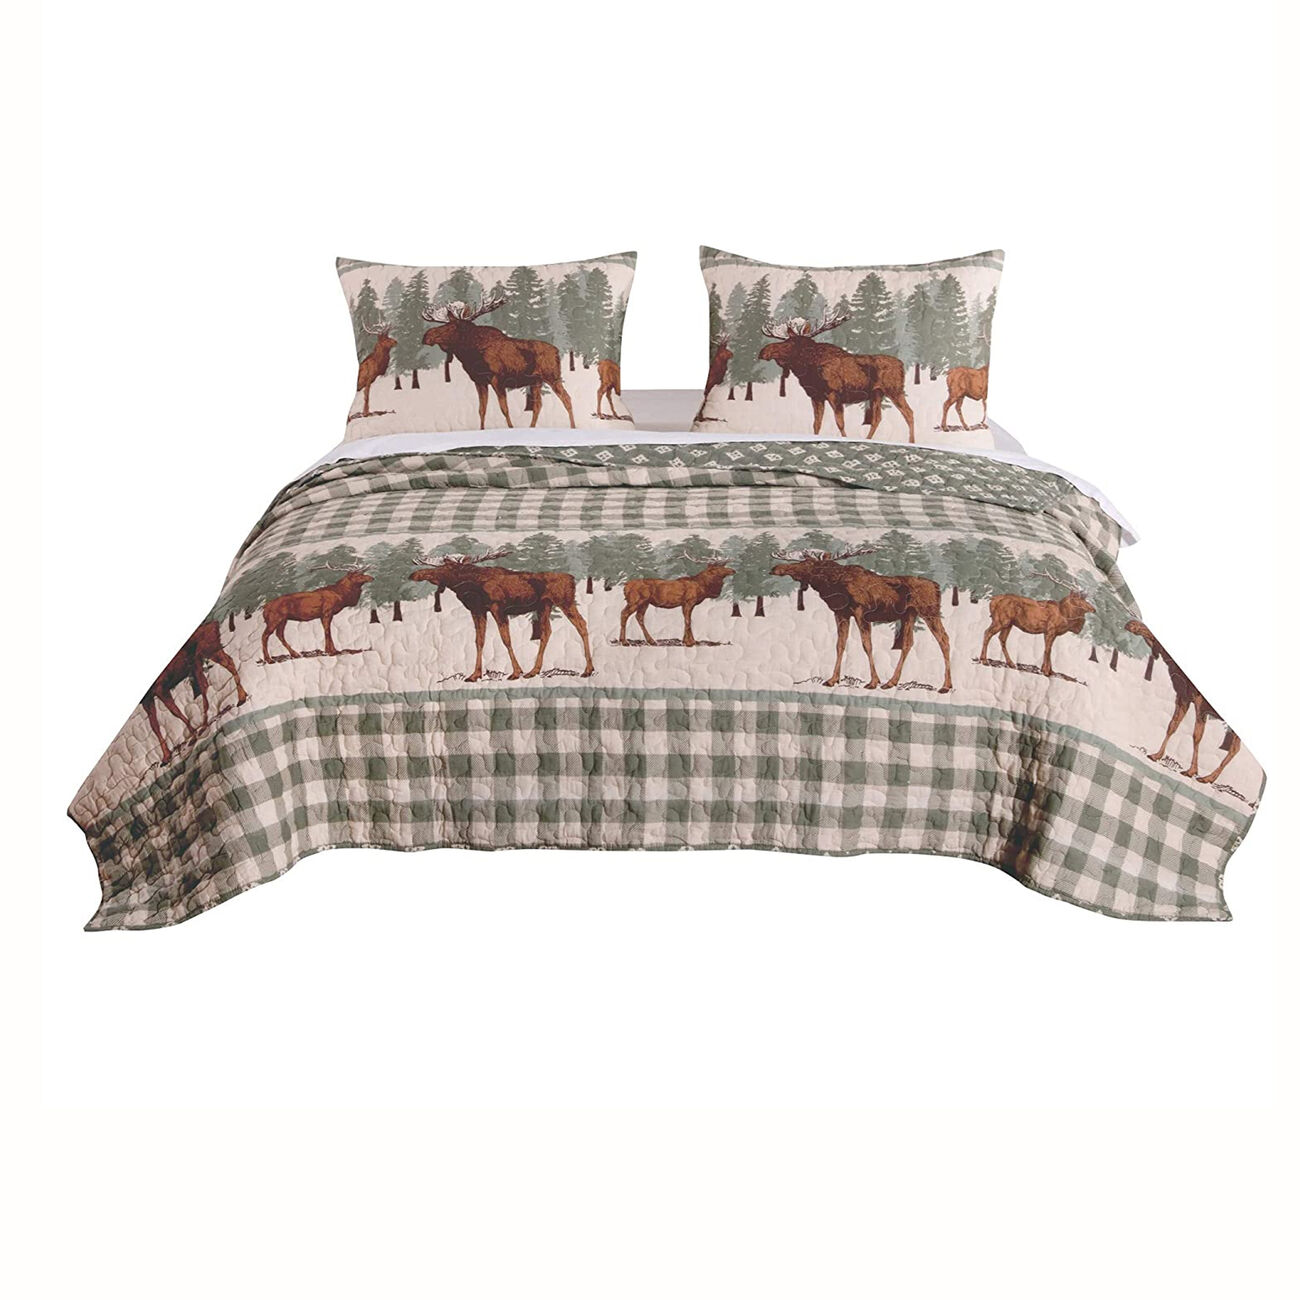 Fabric King Size Quilt Set with Animal and Plaid Print, Green and Brown - BM223379